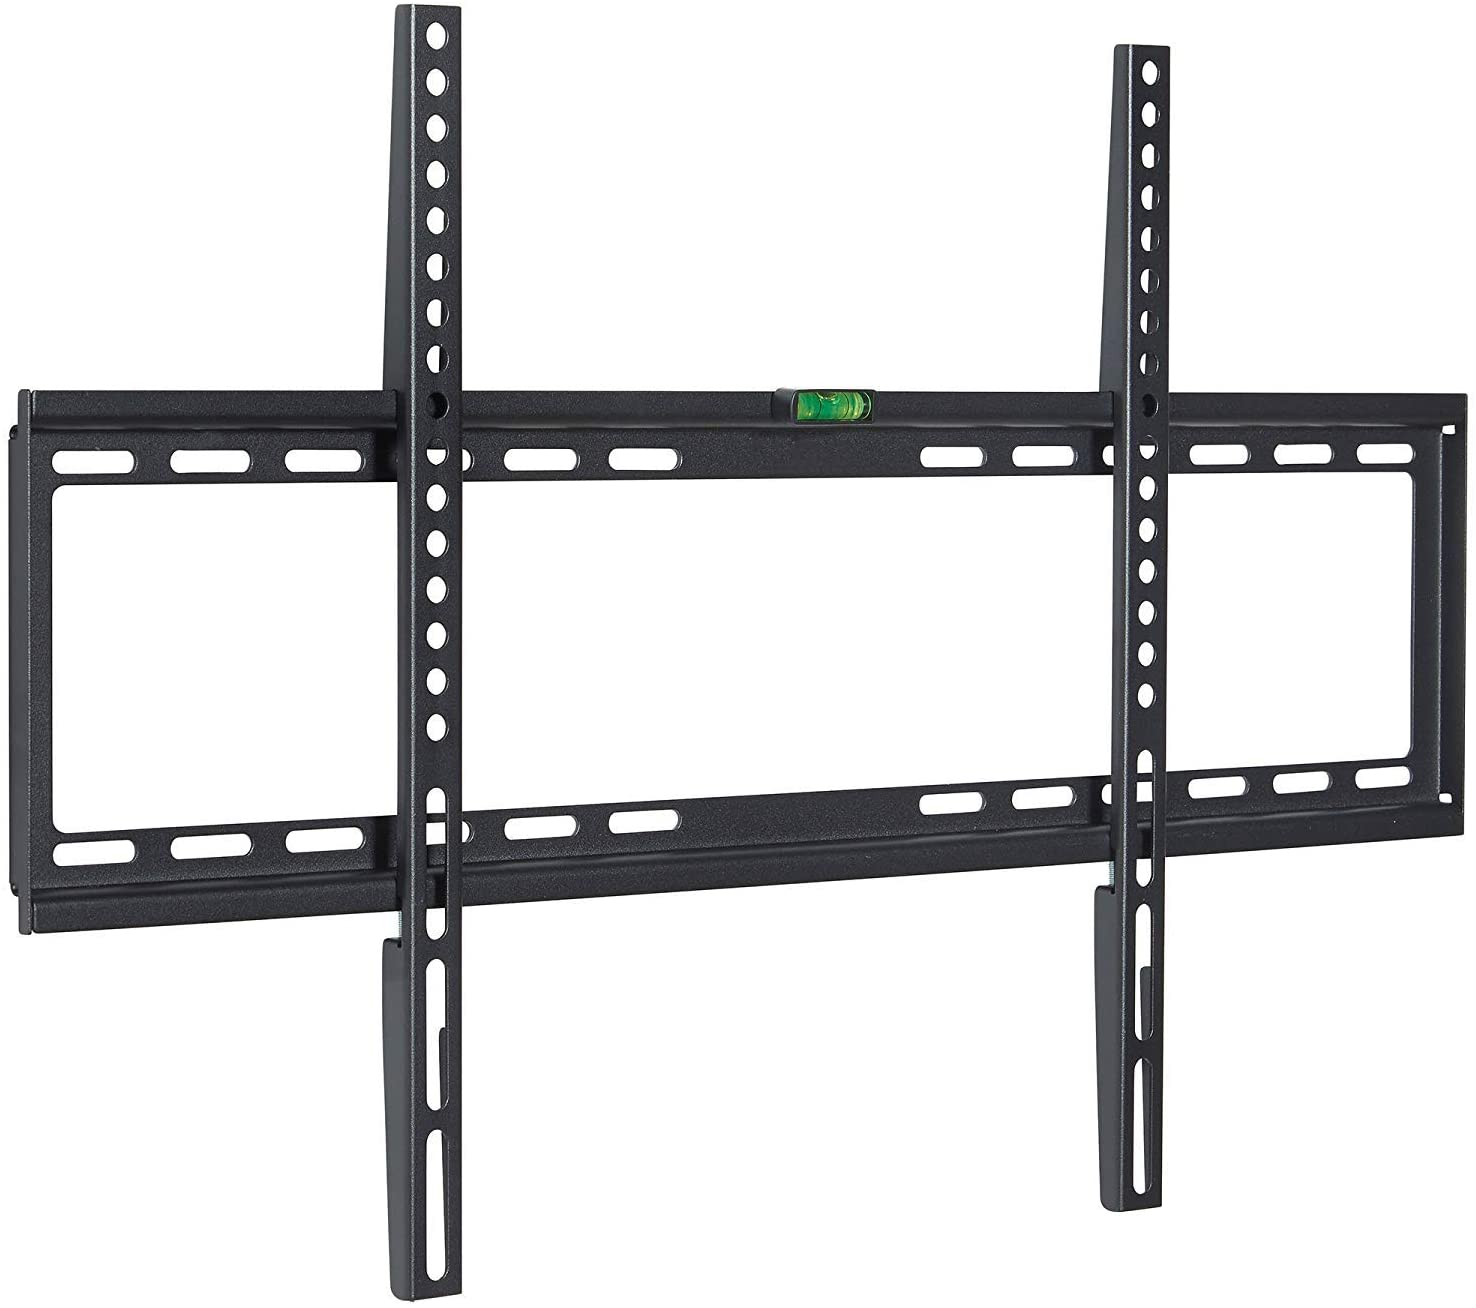 32-70 Inch Fixed TV Wall Mount Bracket TV Bracket Wall Mount up to 75KG - SILBERSHELL